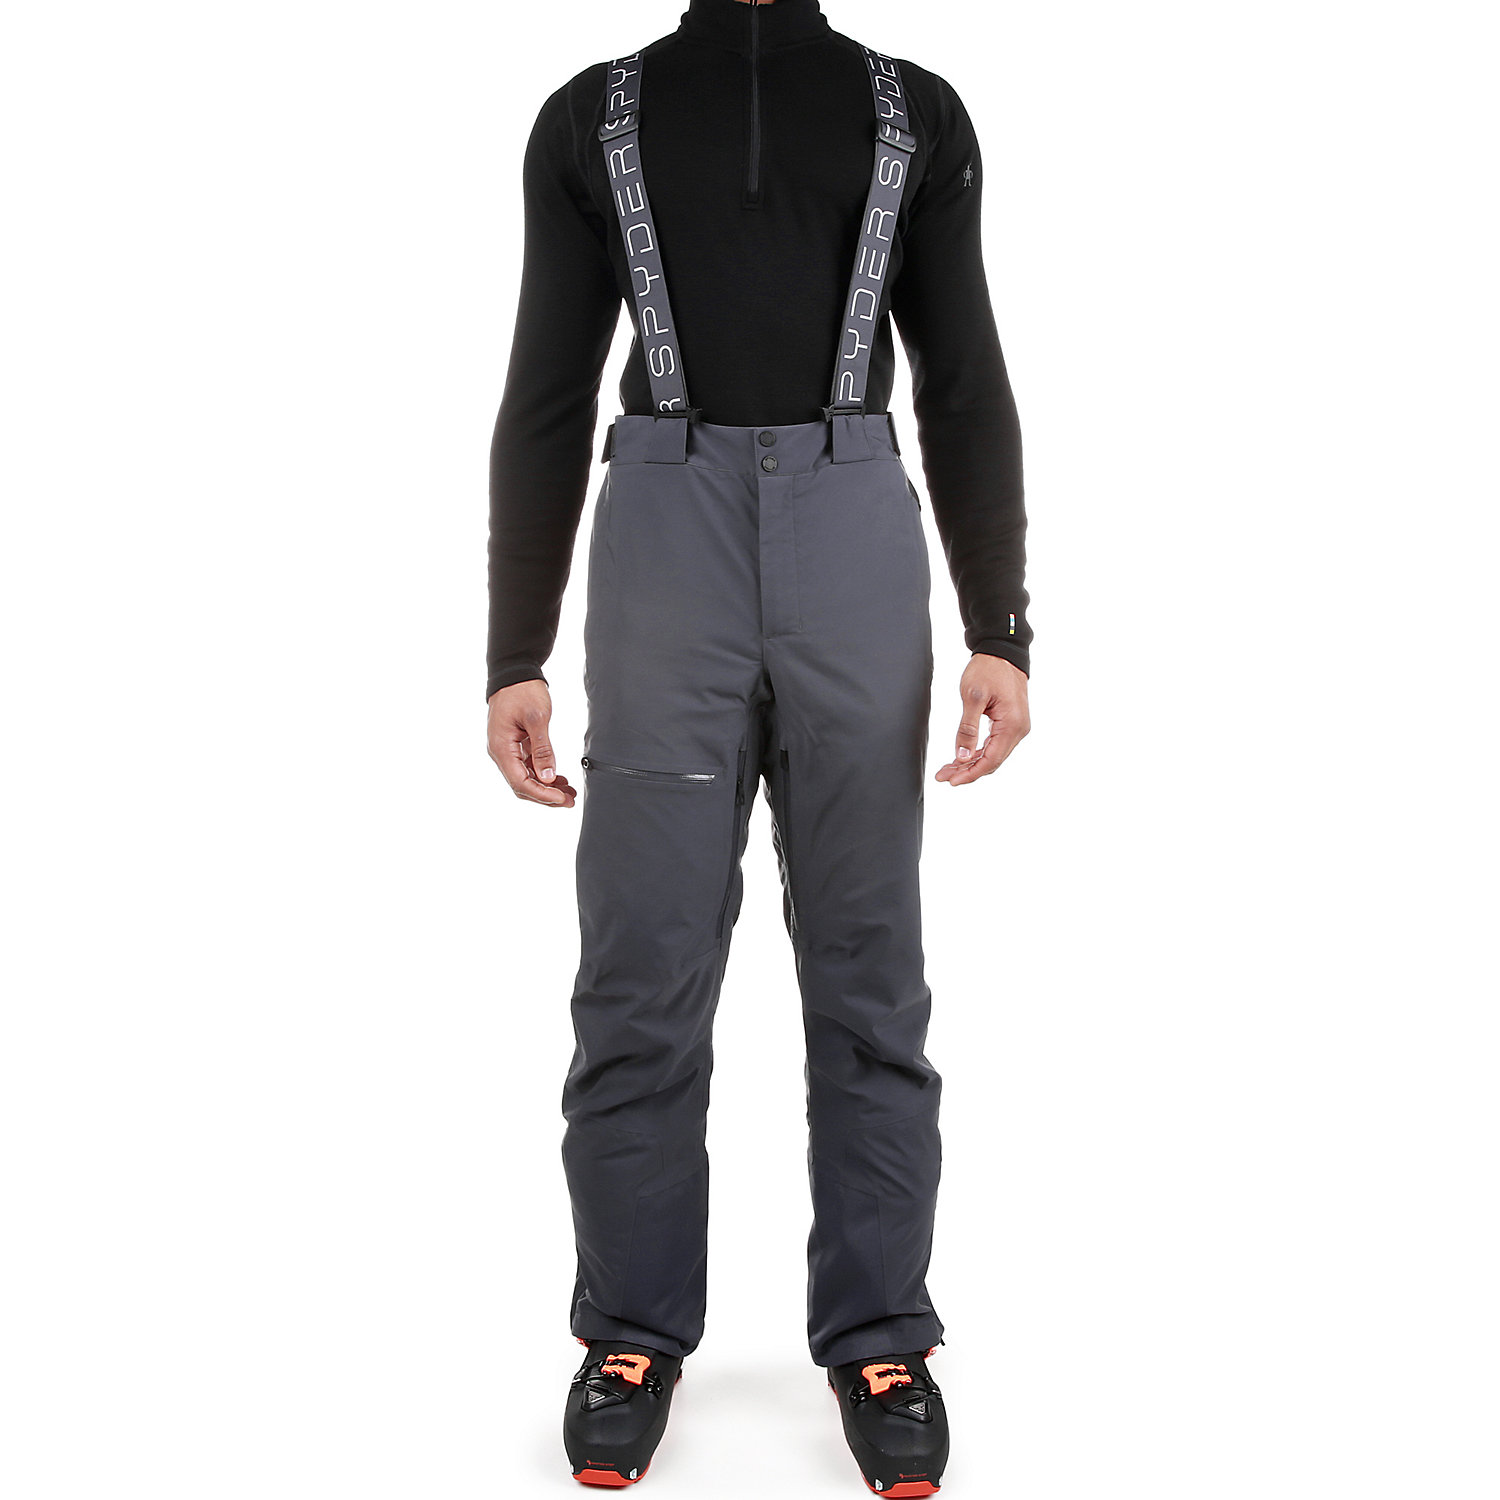 Spyder Men’s Dare Tailored Fit Gore-Tex Insulated Waterproof Snow Sport Pant